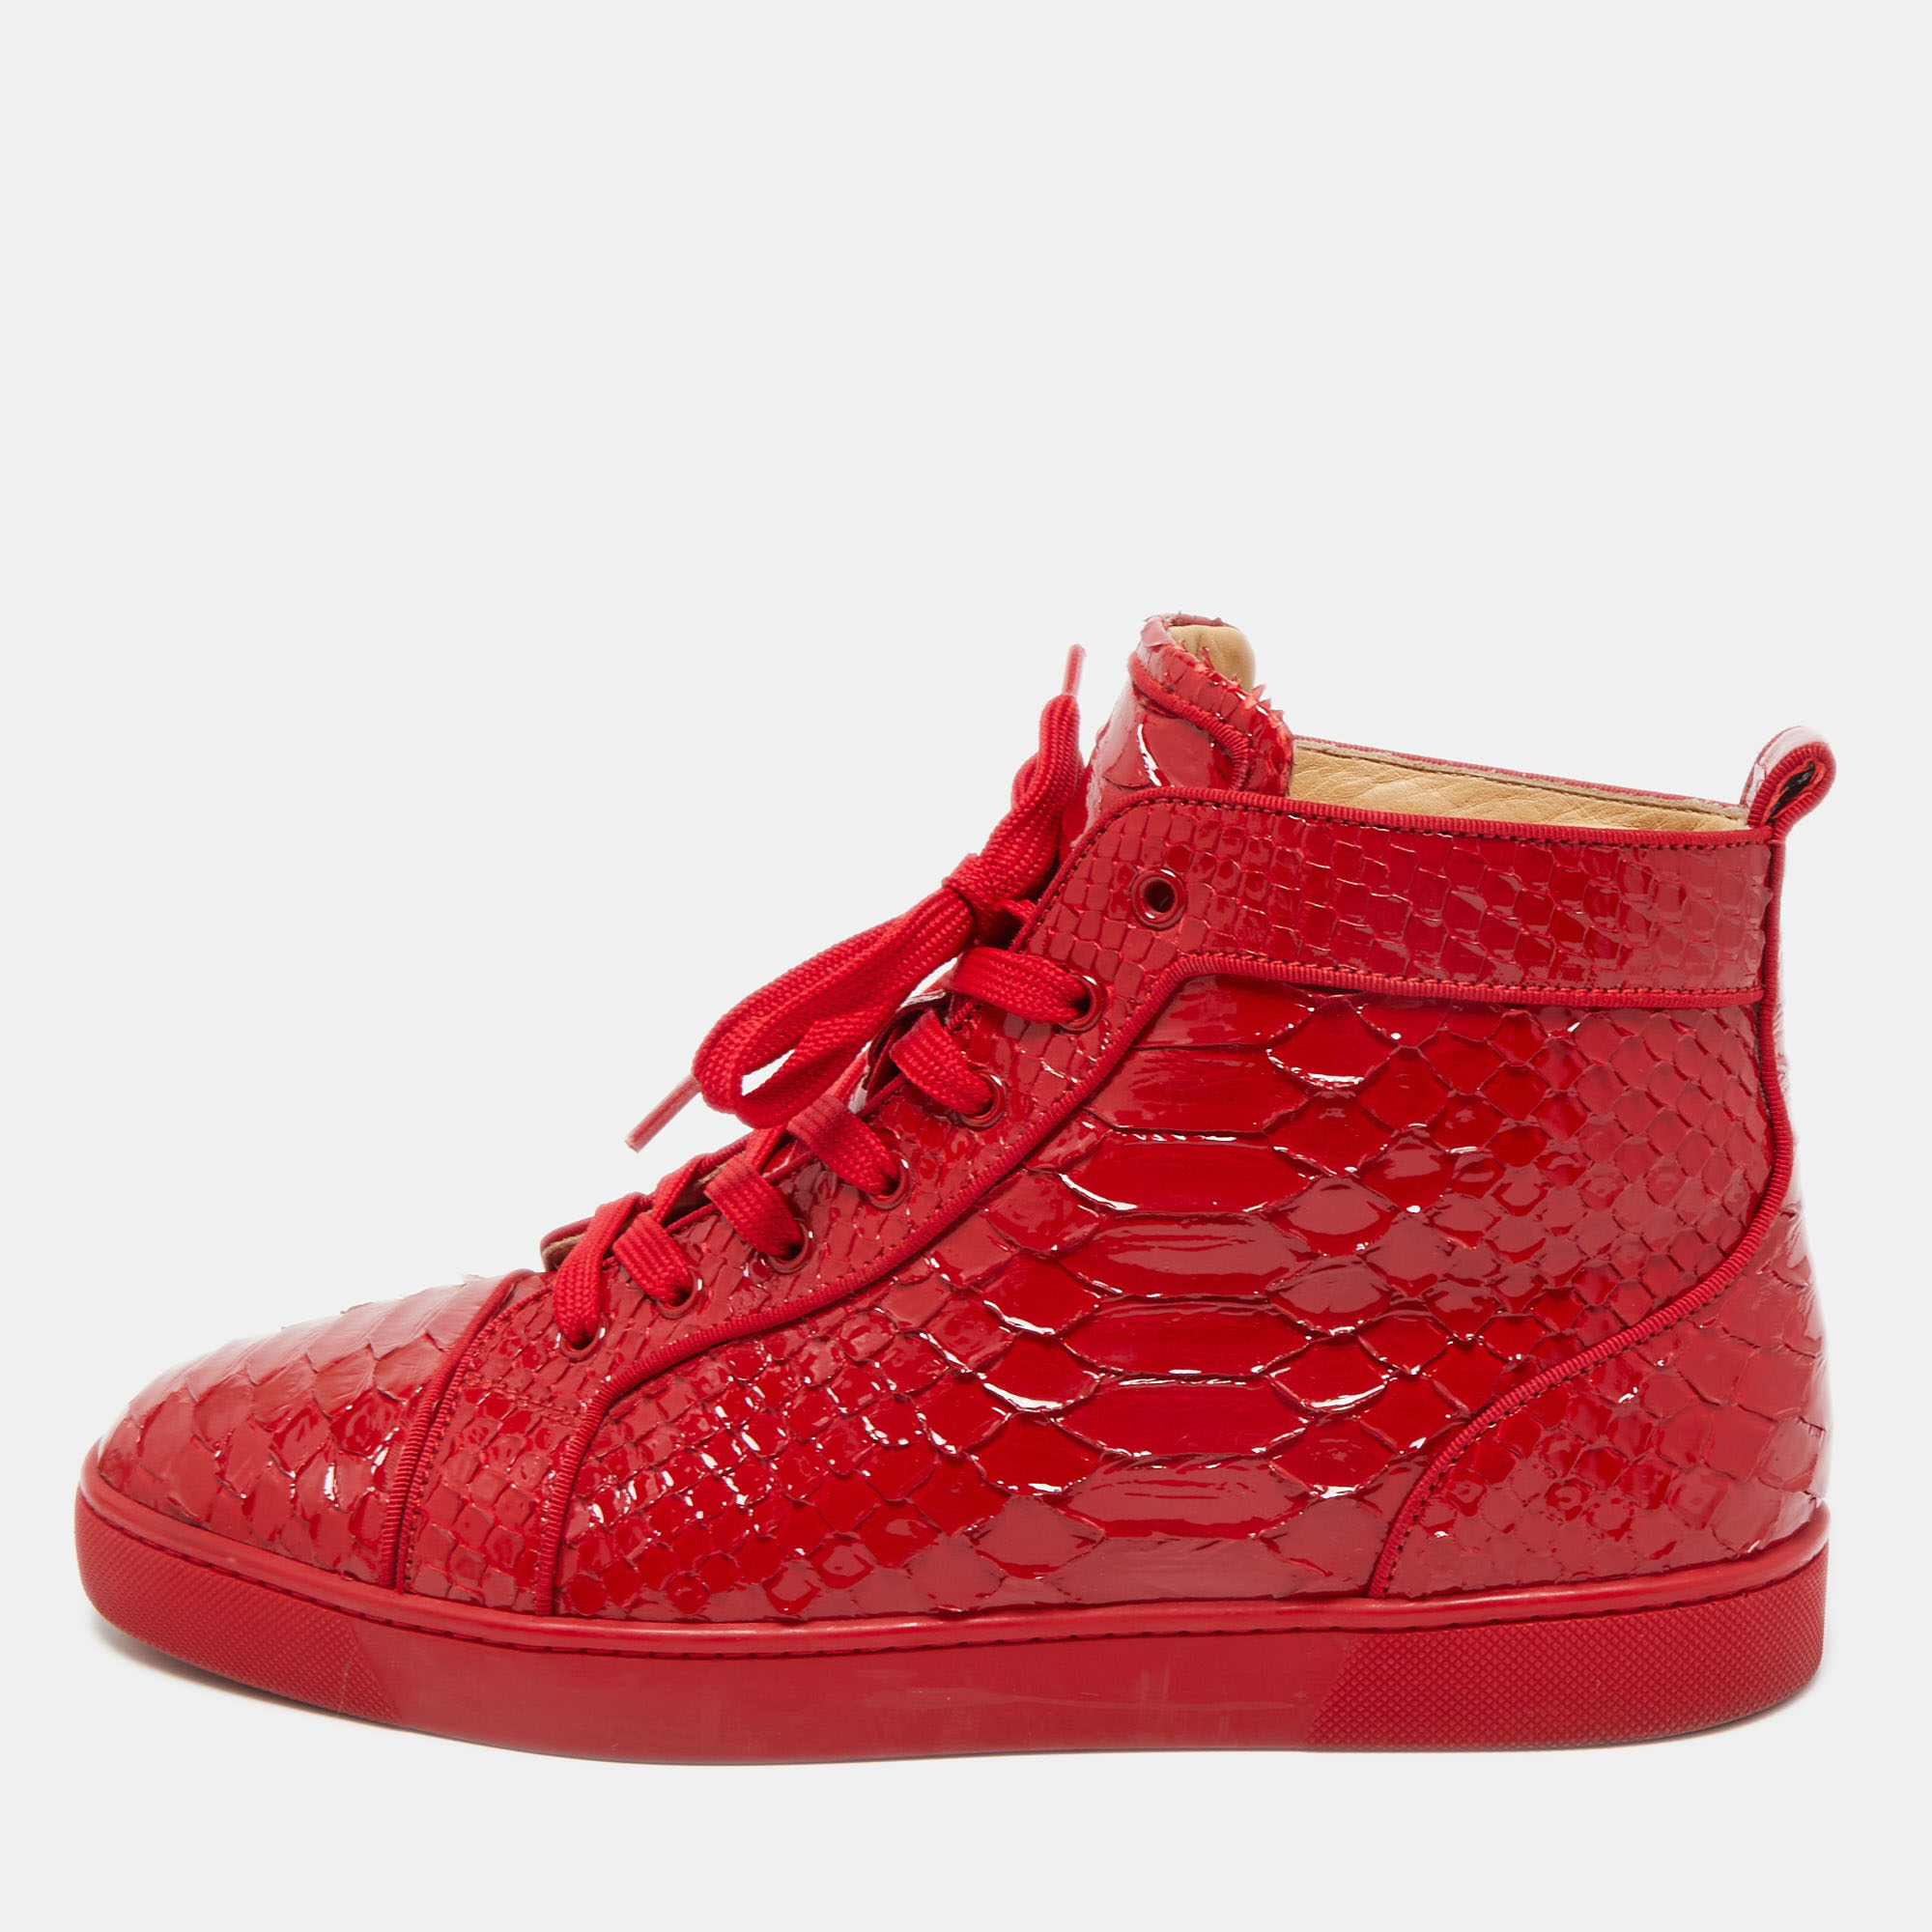 Louis Orlato High Top Sneakers in Red - Christian Louboutin